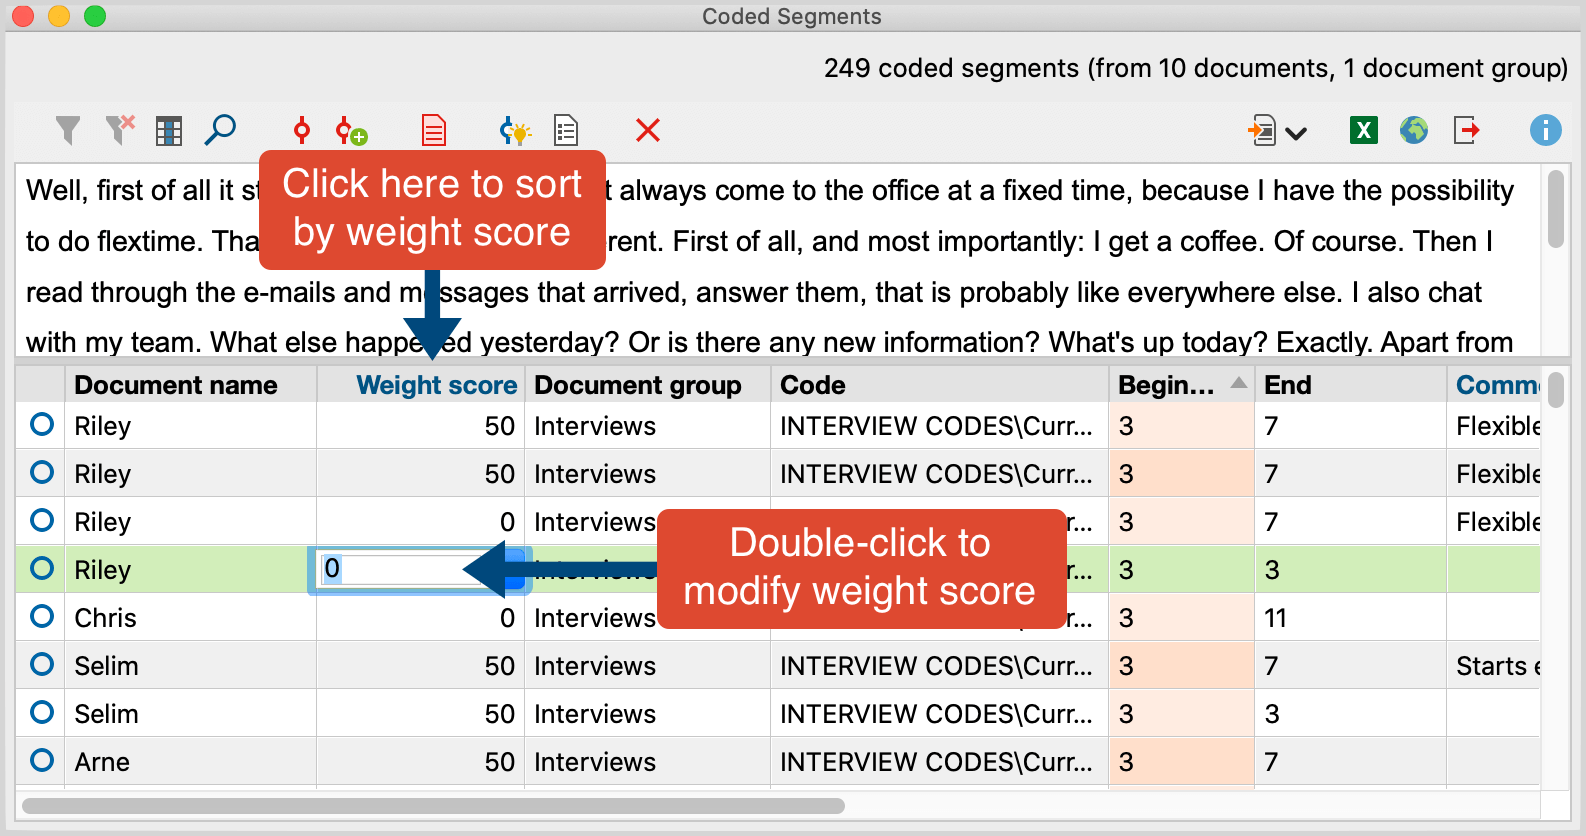 Change the weight score in the “Overview of Coded Segments“